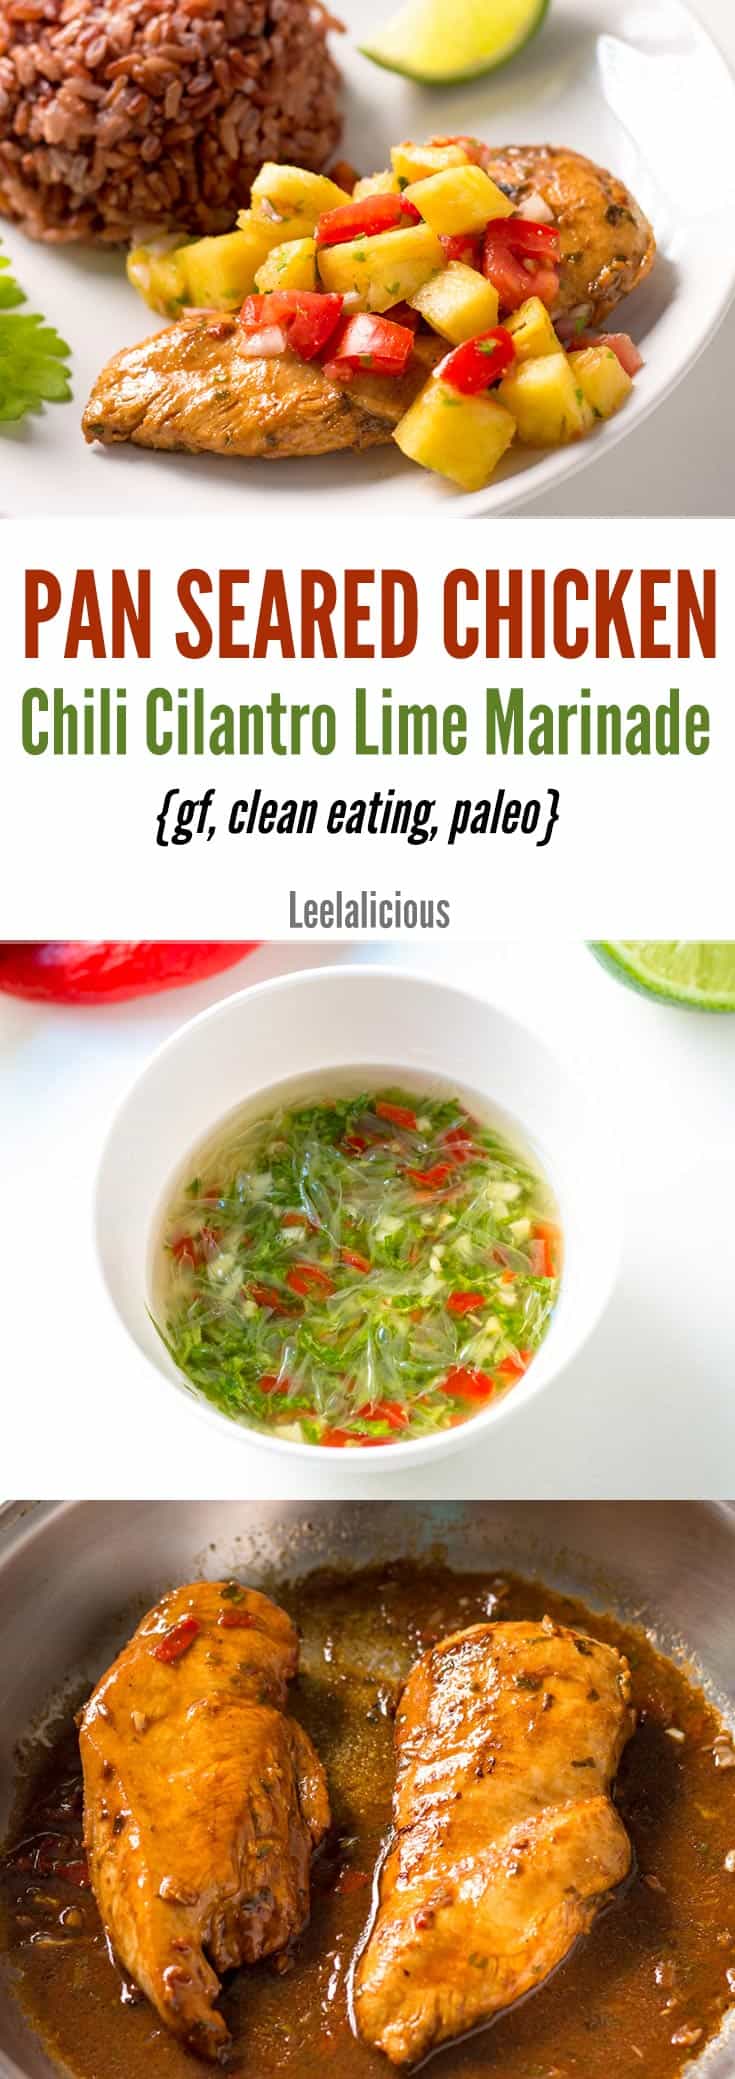 This pan seared chicken recipe with flavorful chili cilantro lime marinade requires minimal prep and just a little planning. It is perfect for a quick dinner that is gluten free, clean eating and paleo friendly.